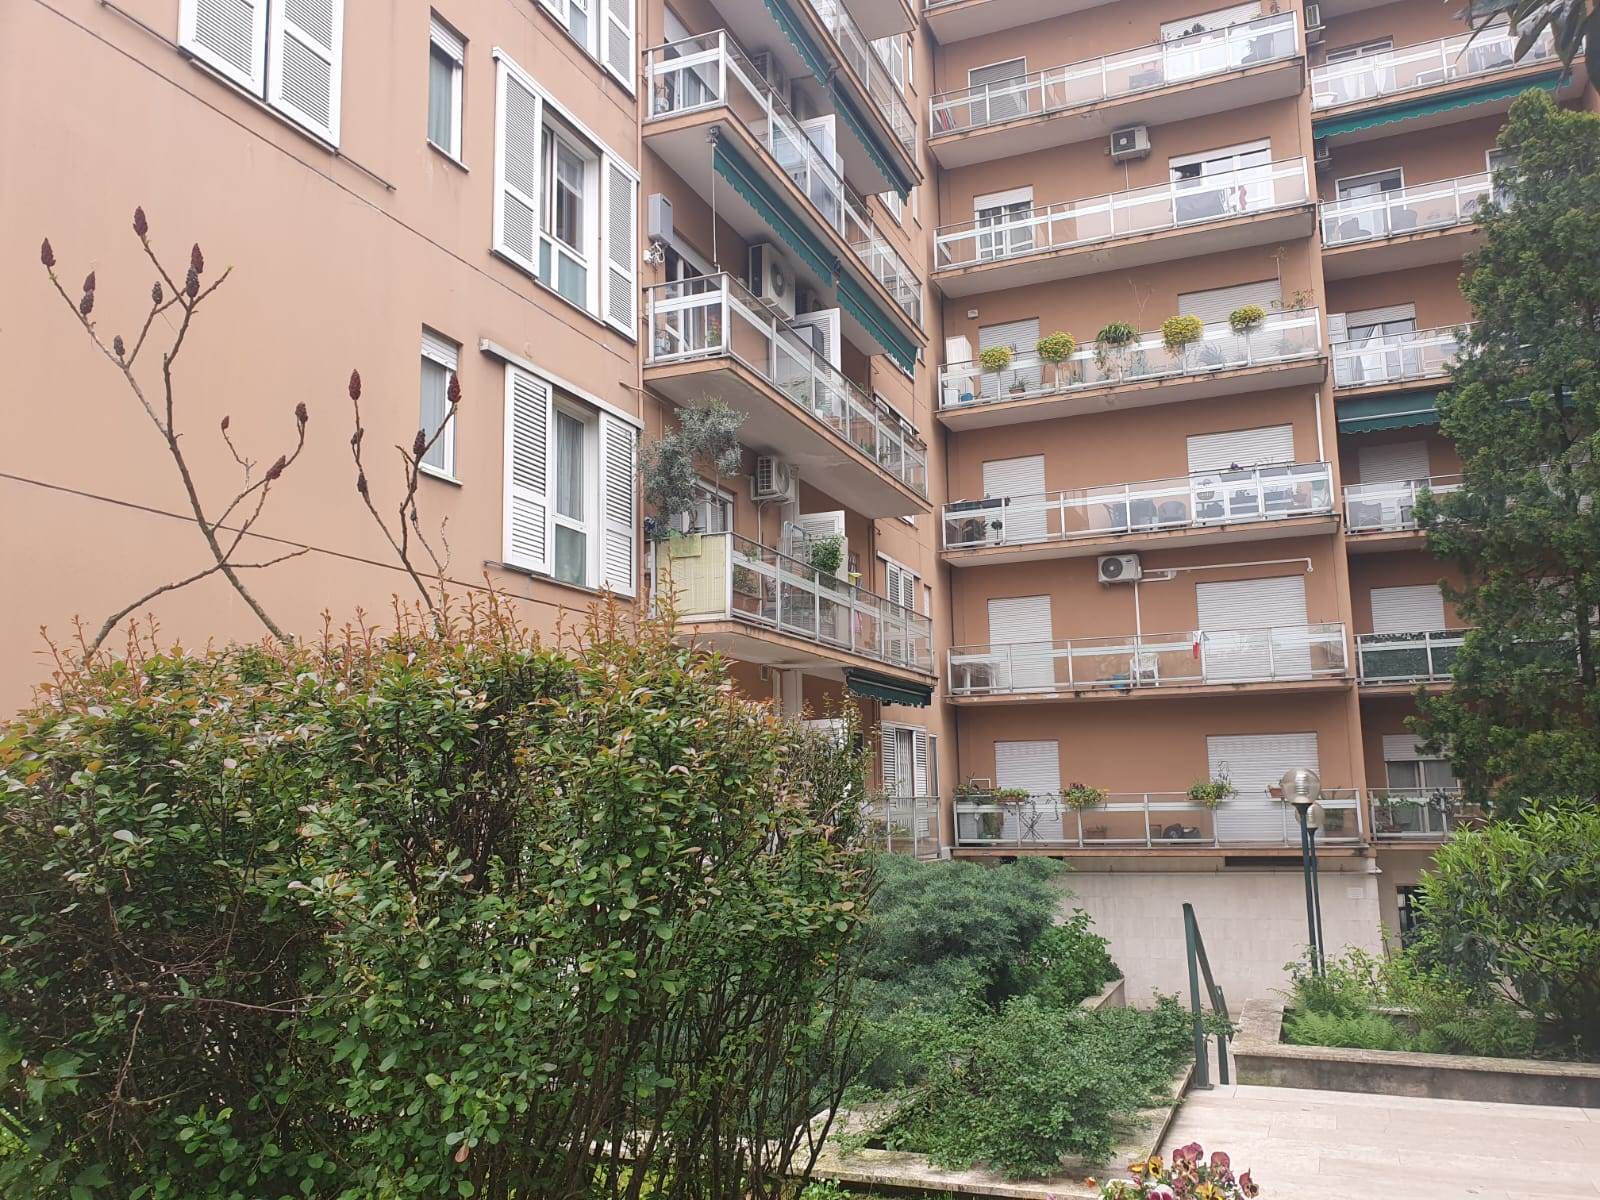 SESTO SAN GIOVANNI, Apartment for sale of 45 Sq. mt., Good condition, Heating Centralized, Energetic class: G, placed at 5° on 11, composed by: 1 